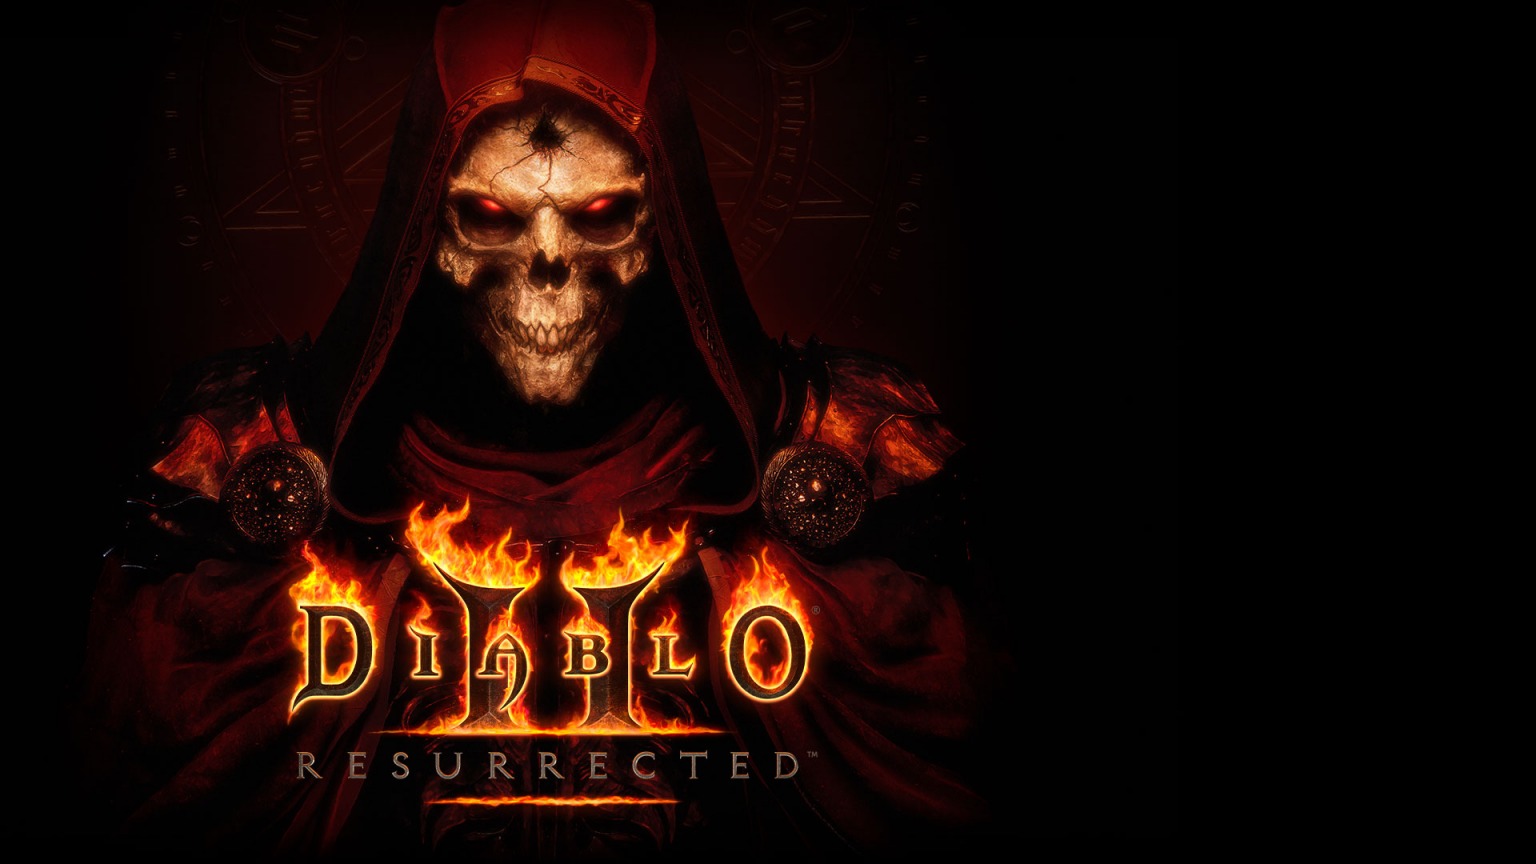 diablo 2 connection has been interrupted after 5 seconds of gameplay